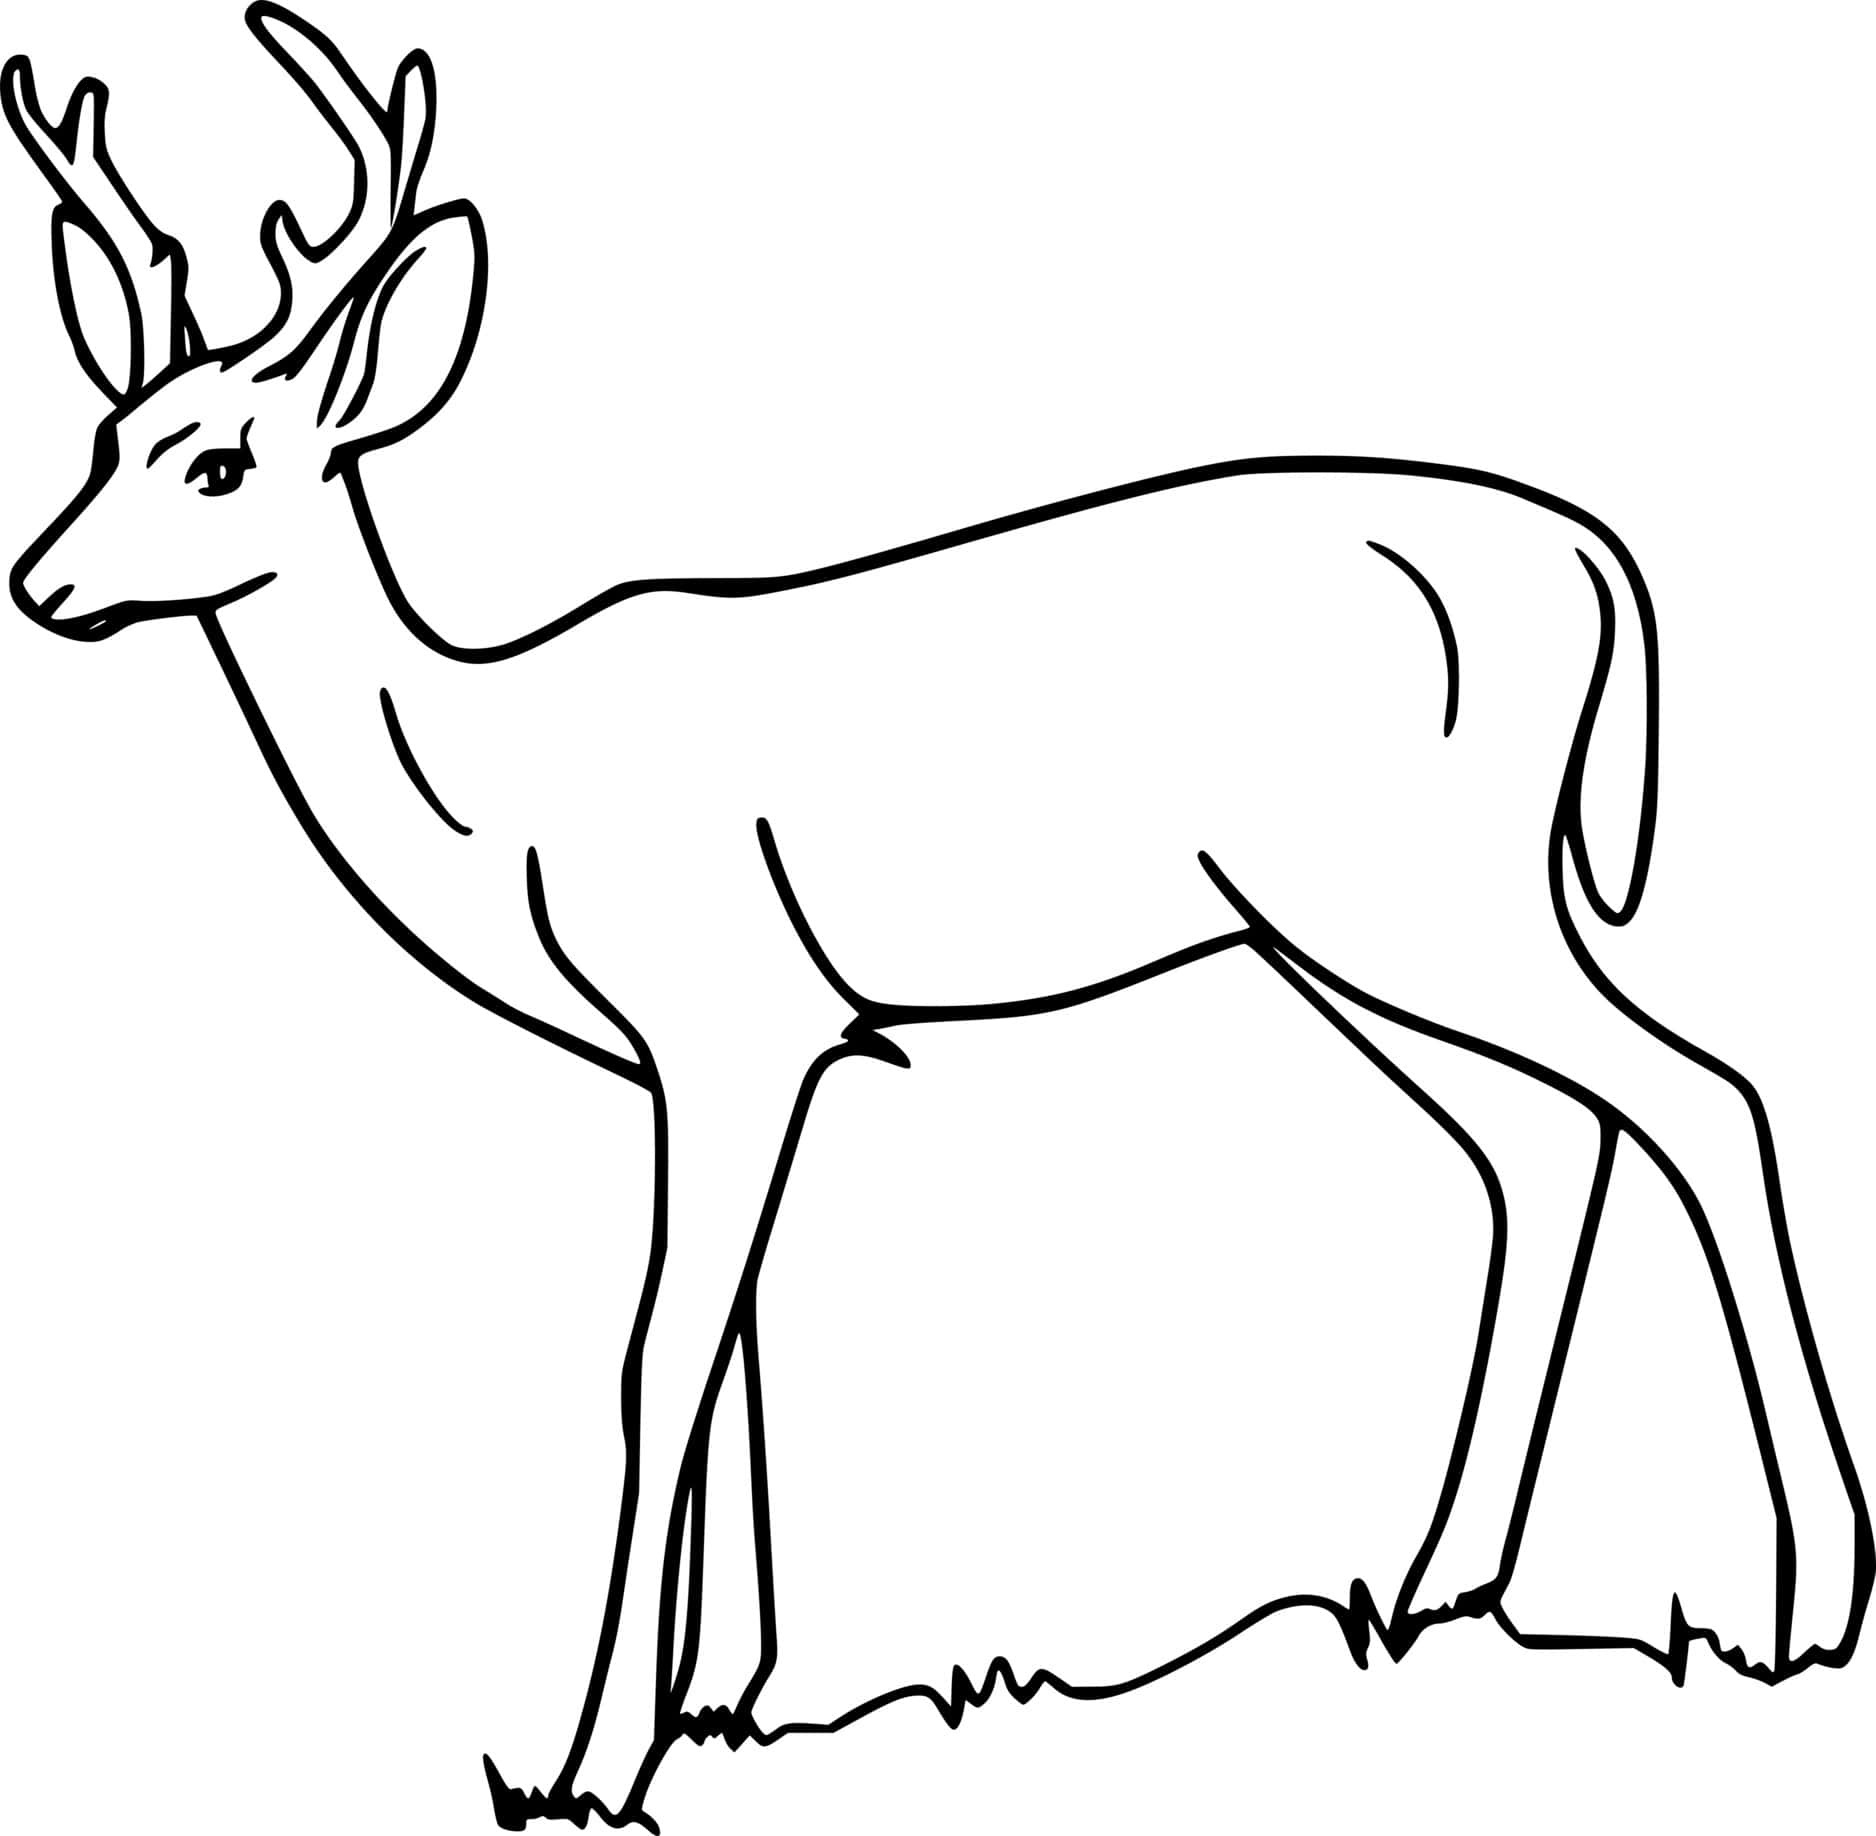 Simple Deer On The Grass Coloring Page